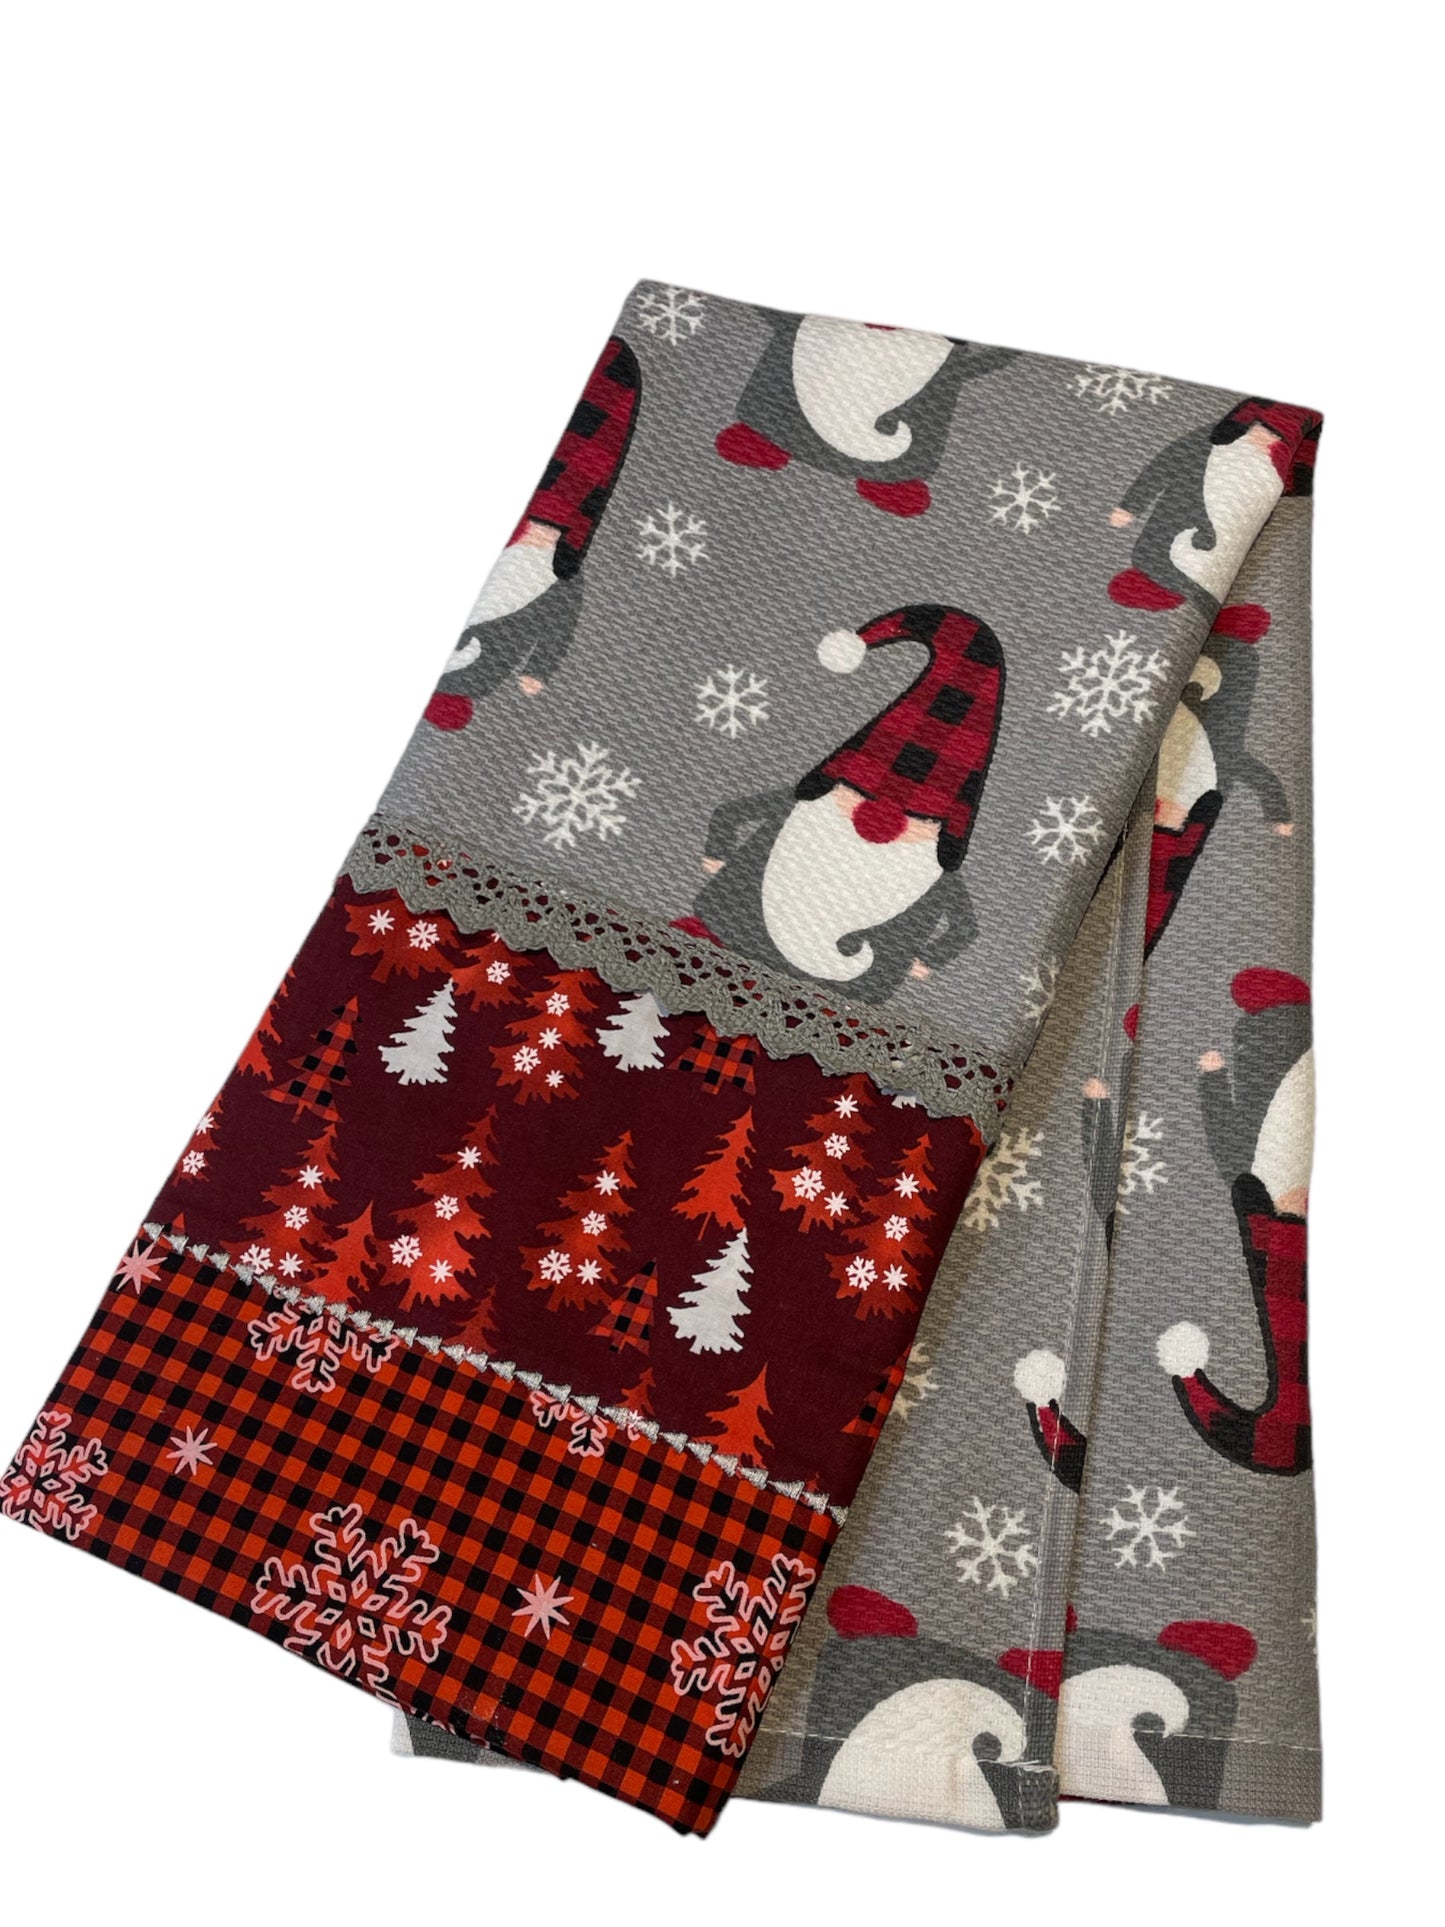 Charming Grey and Red gnome Christmas Dish Towel with Handcrafted Details